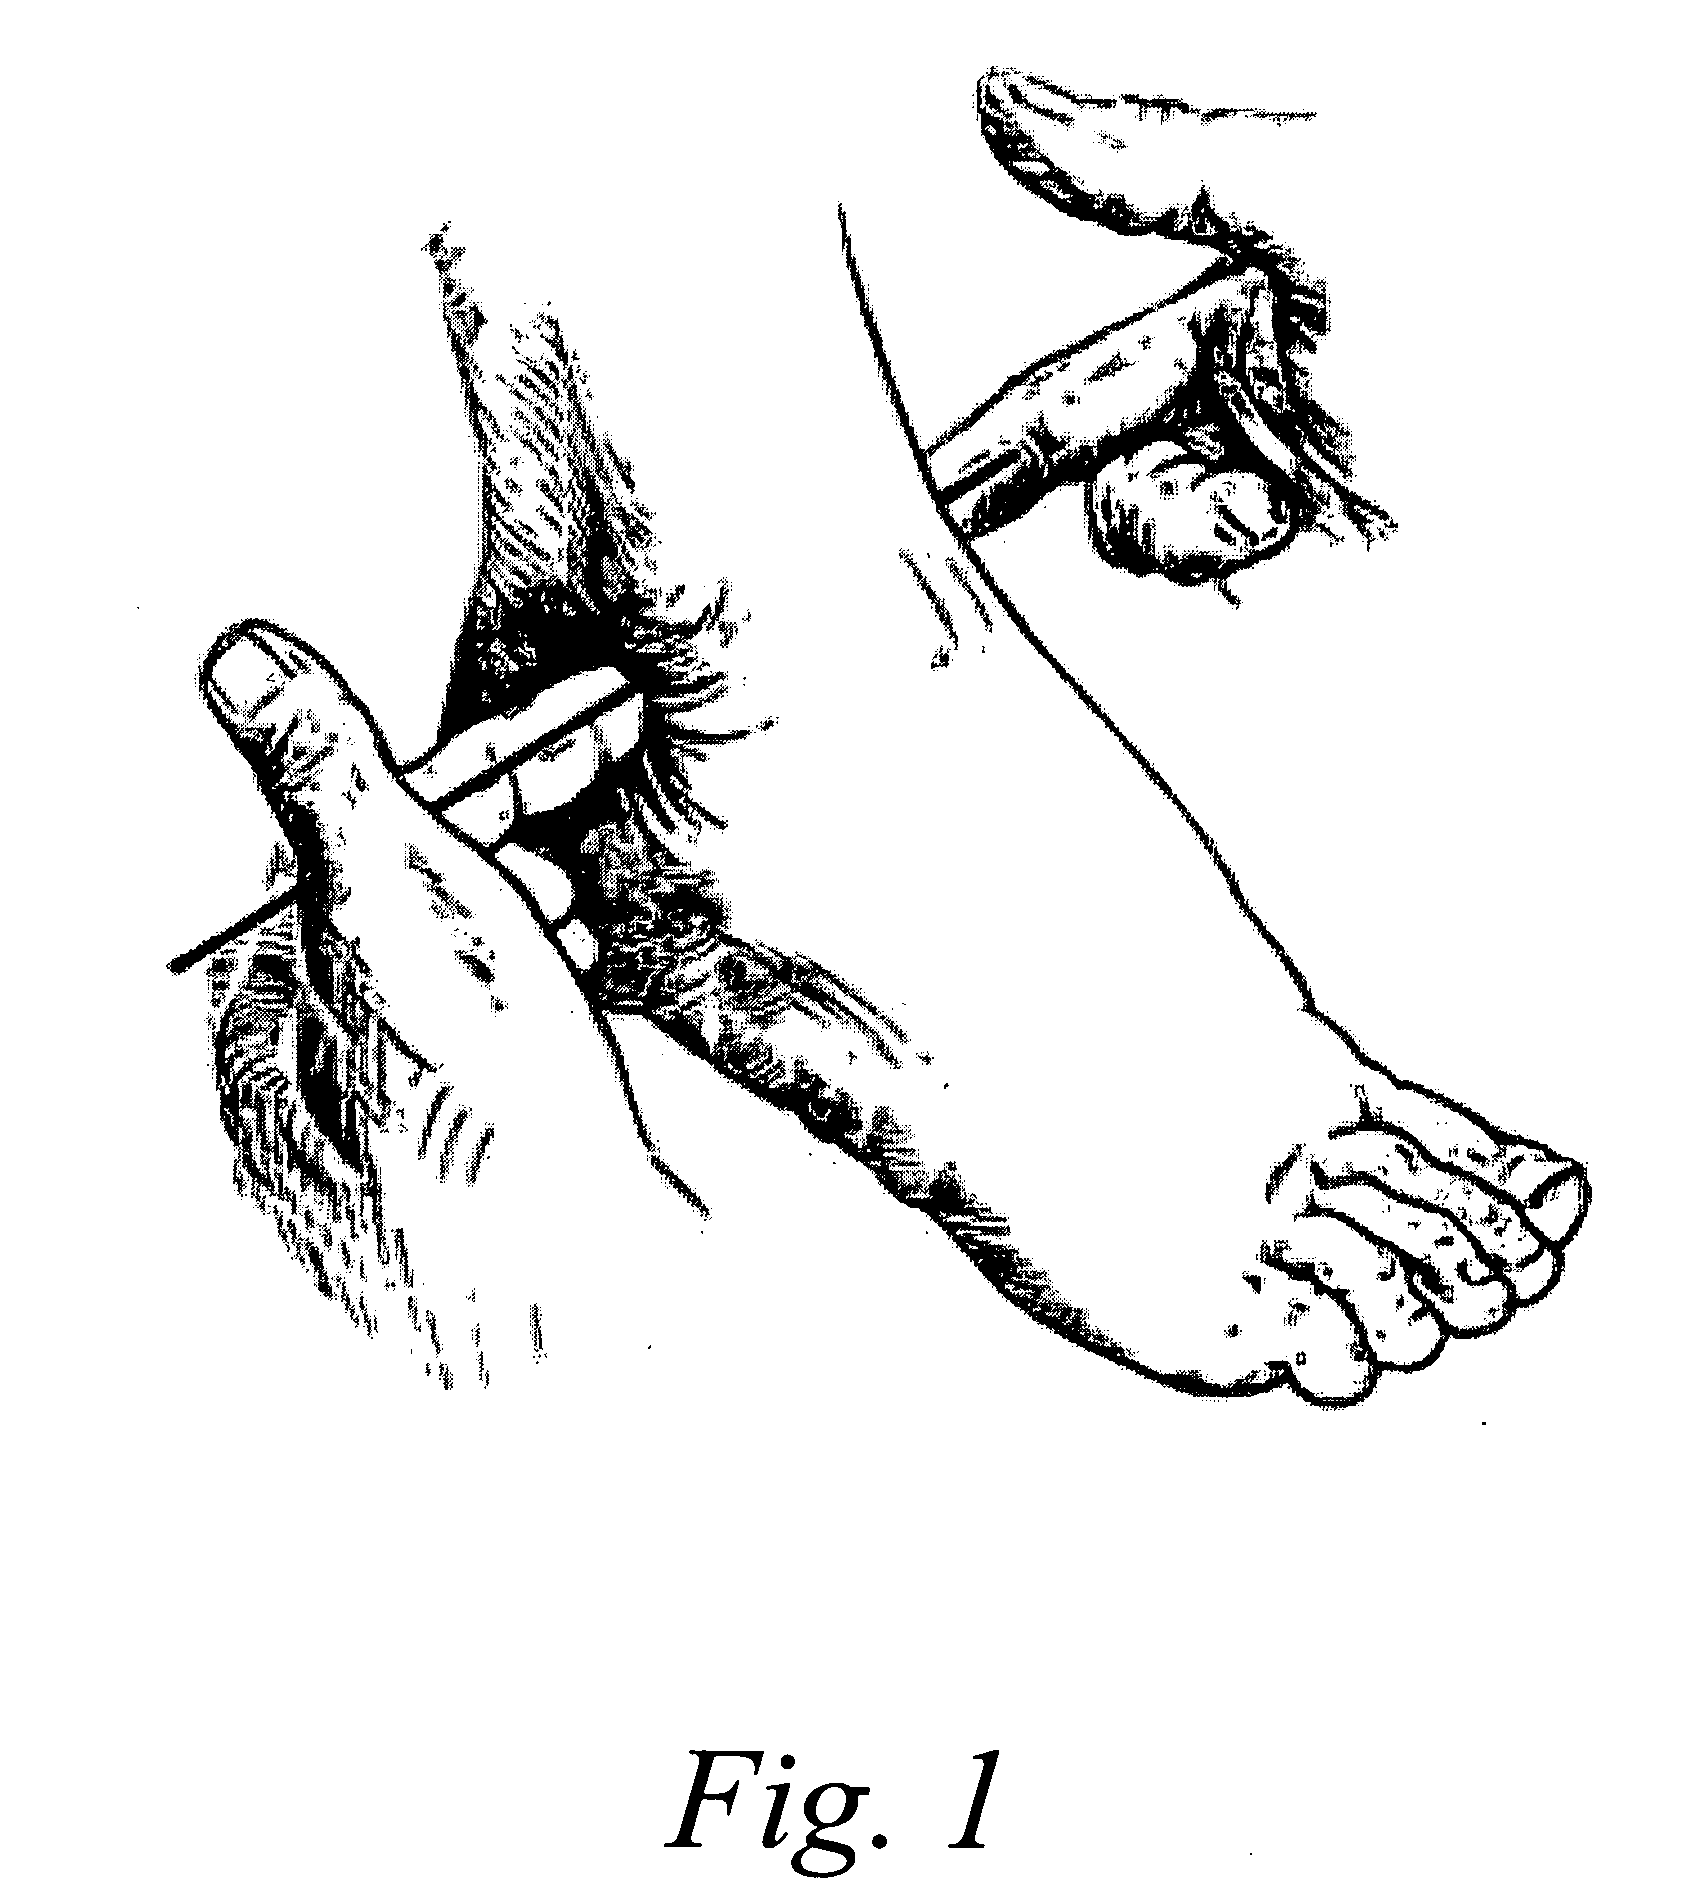 Ankle Derotation and Subtalar Stabilization Orthosis